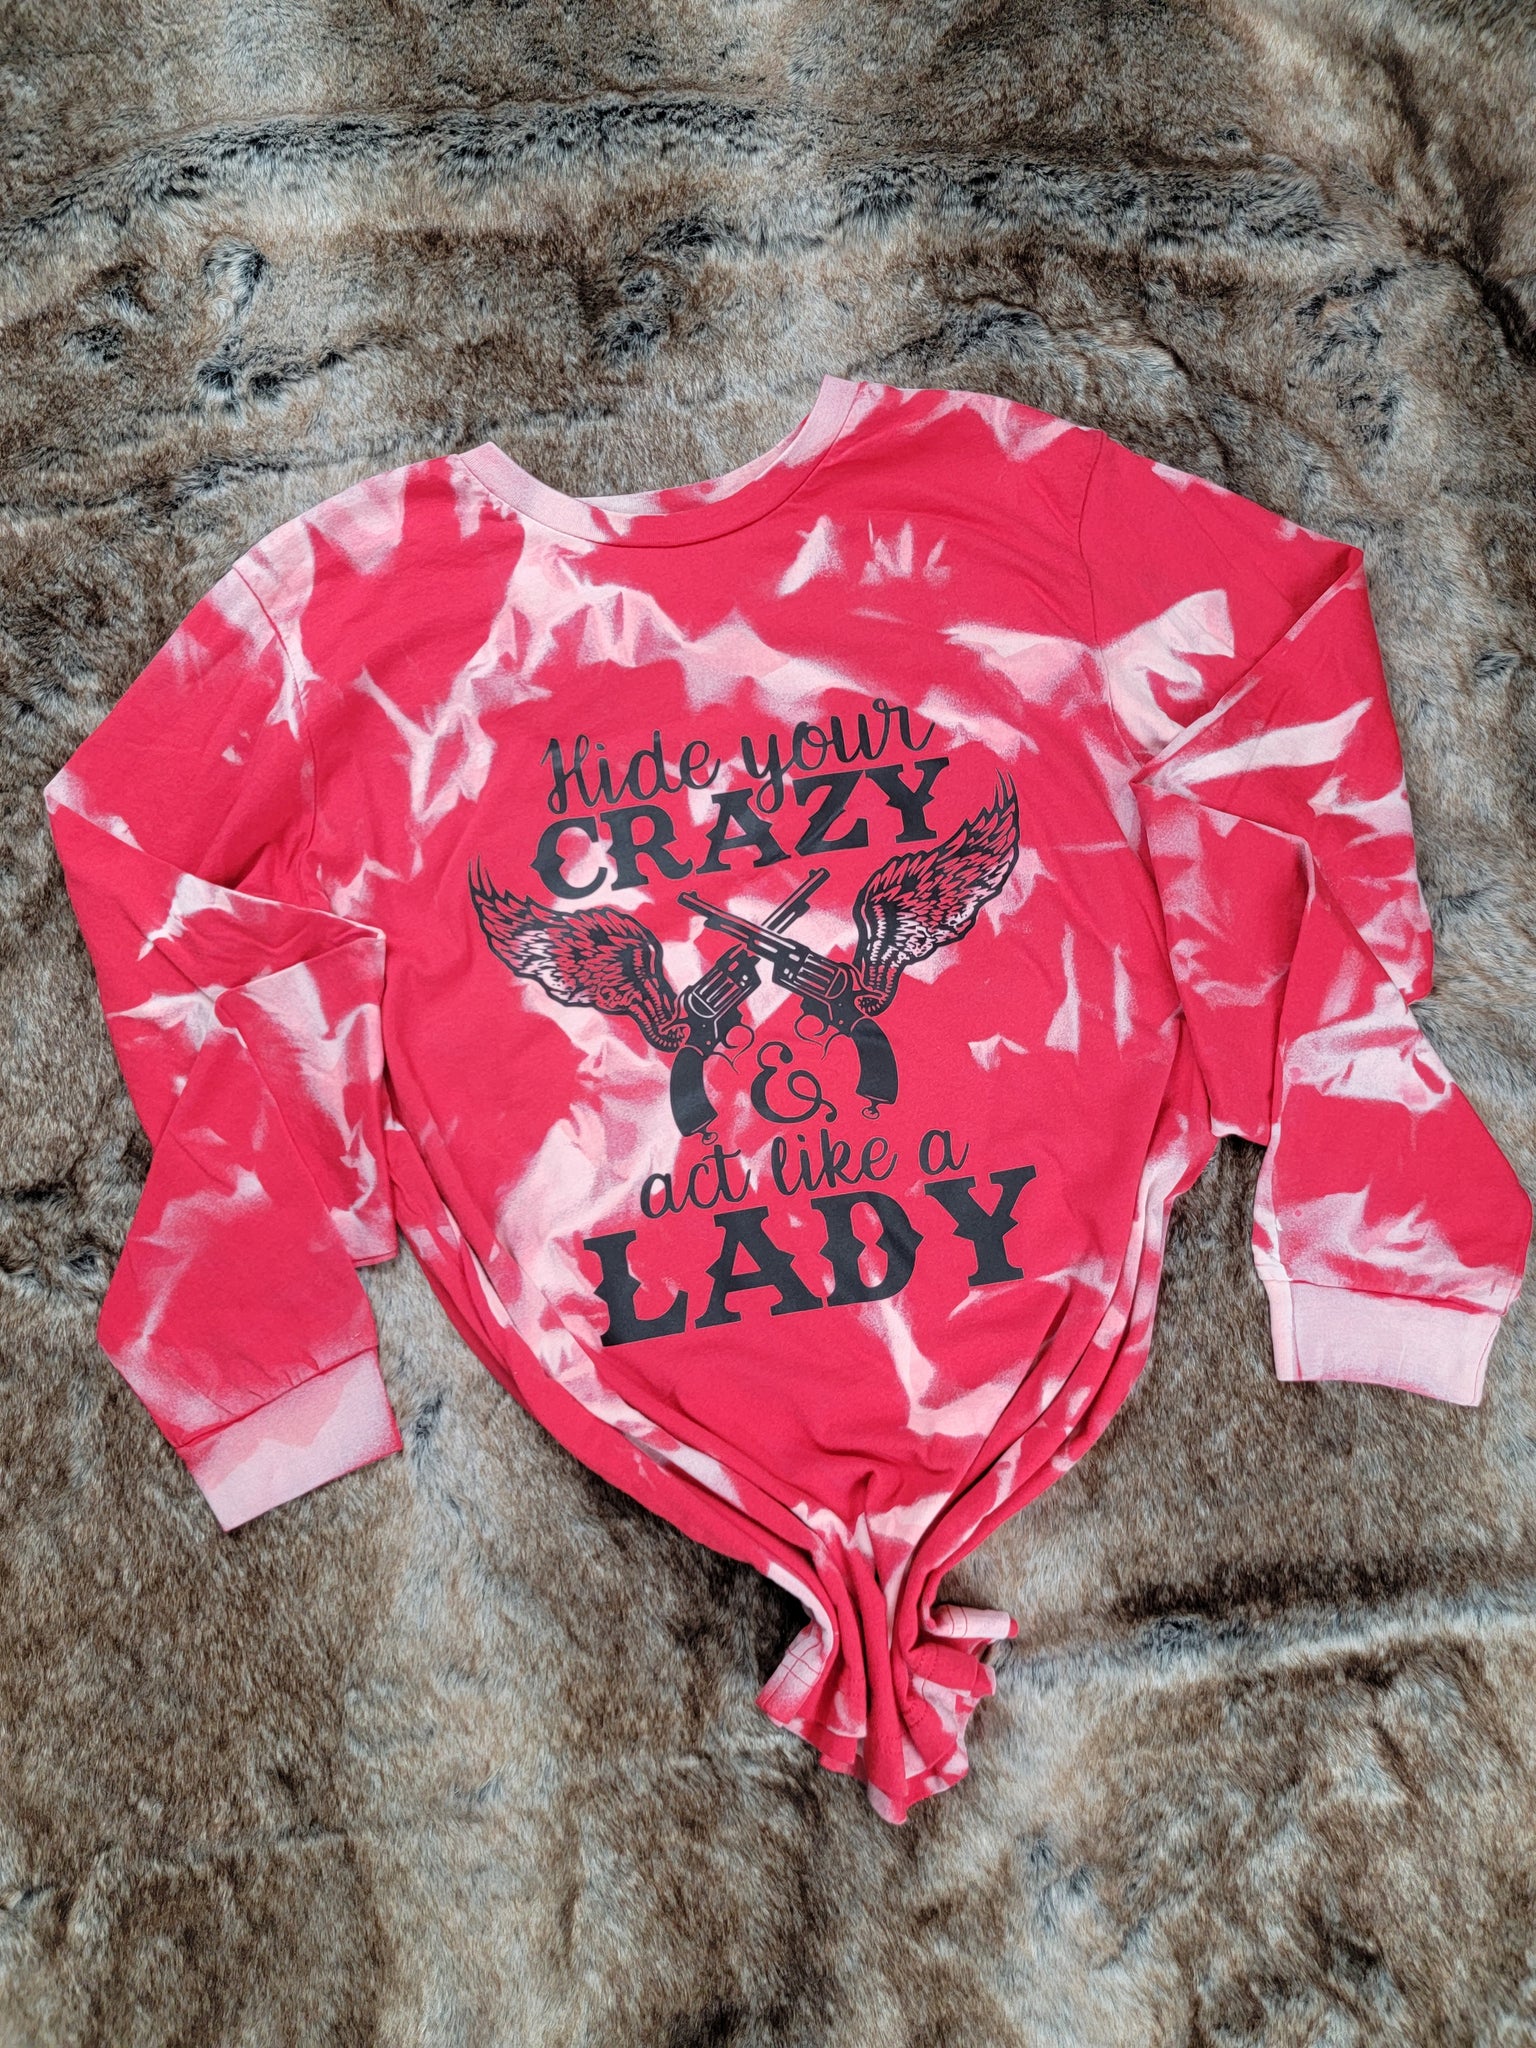 Hide Your Crazy Act Like a Lady Bleached Tee